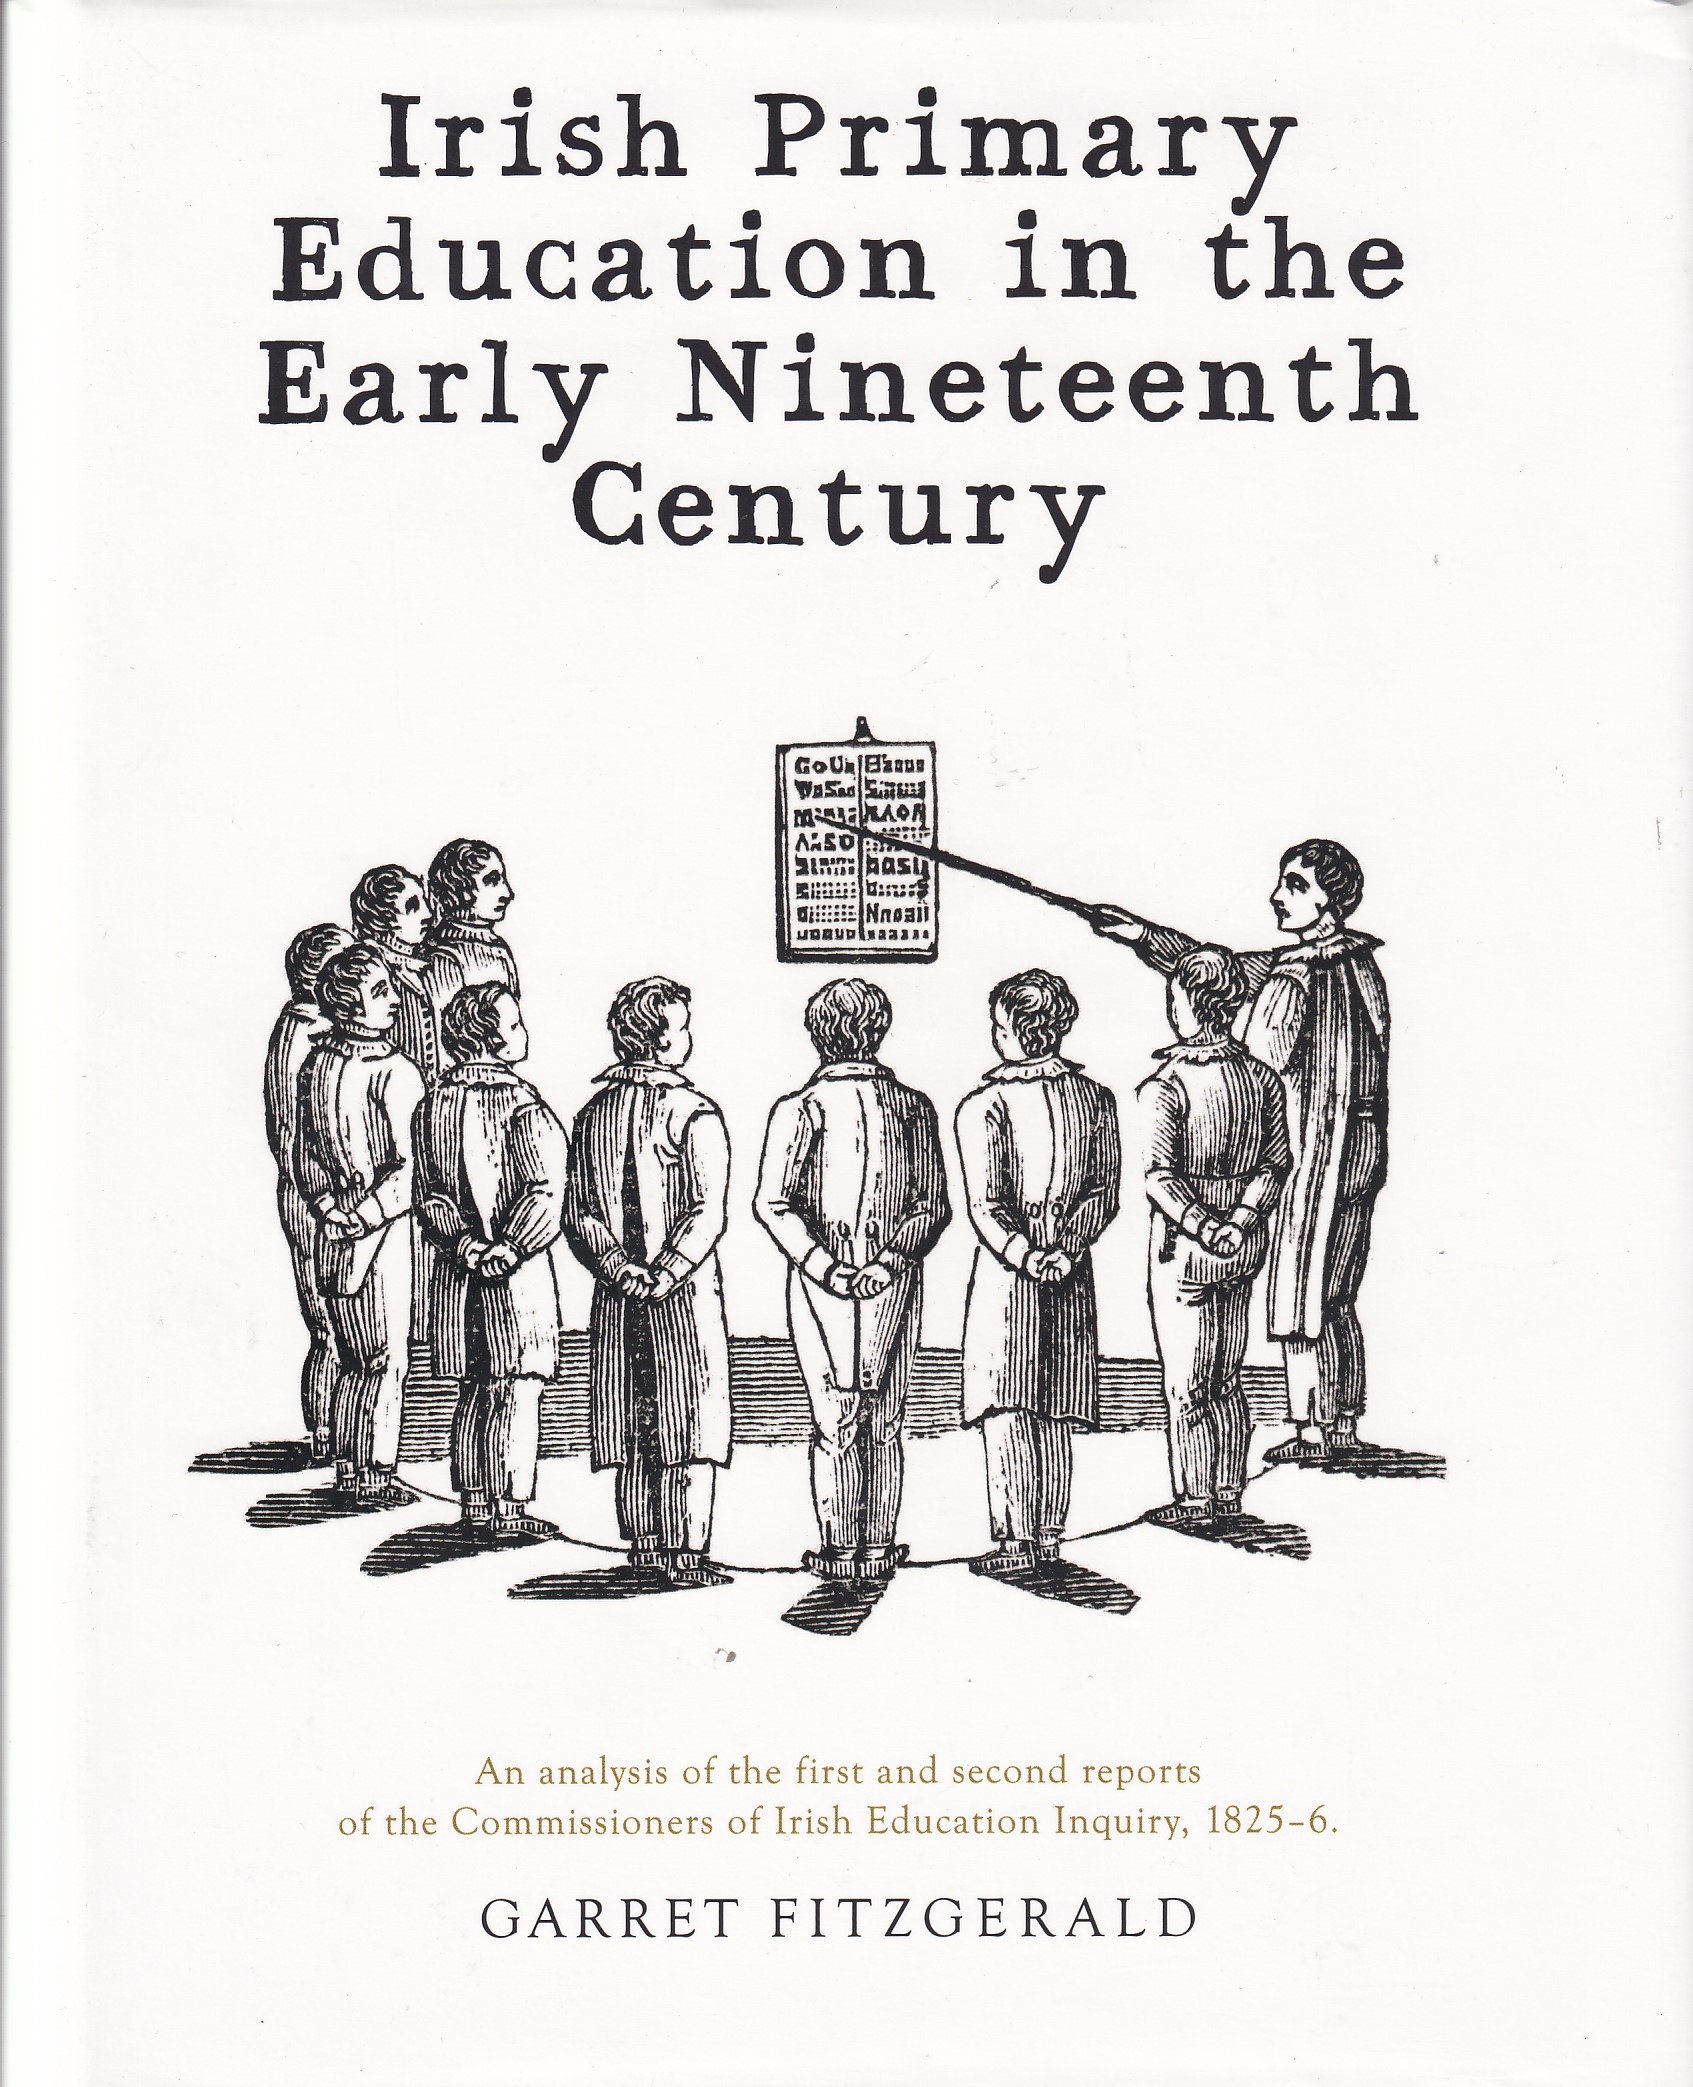 Irish Primary Education in the Early Nineteenth Century: An Analysis of the First and Second Reports of the Commissioners of Irish Education Inquiry, 1825-6 by Garret Fitzgerald